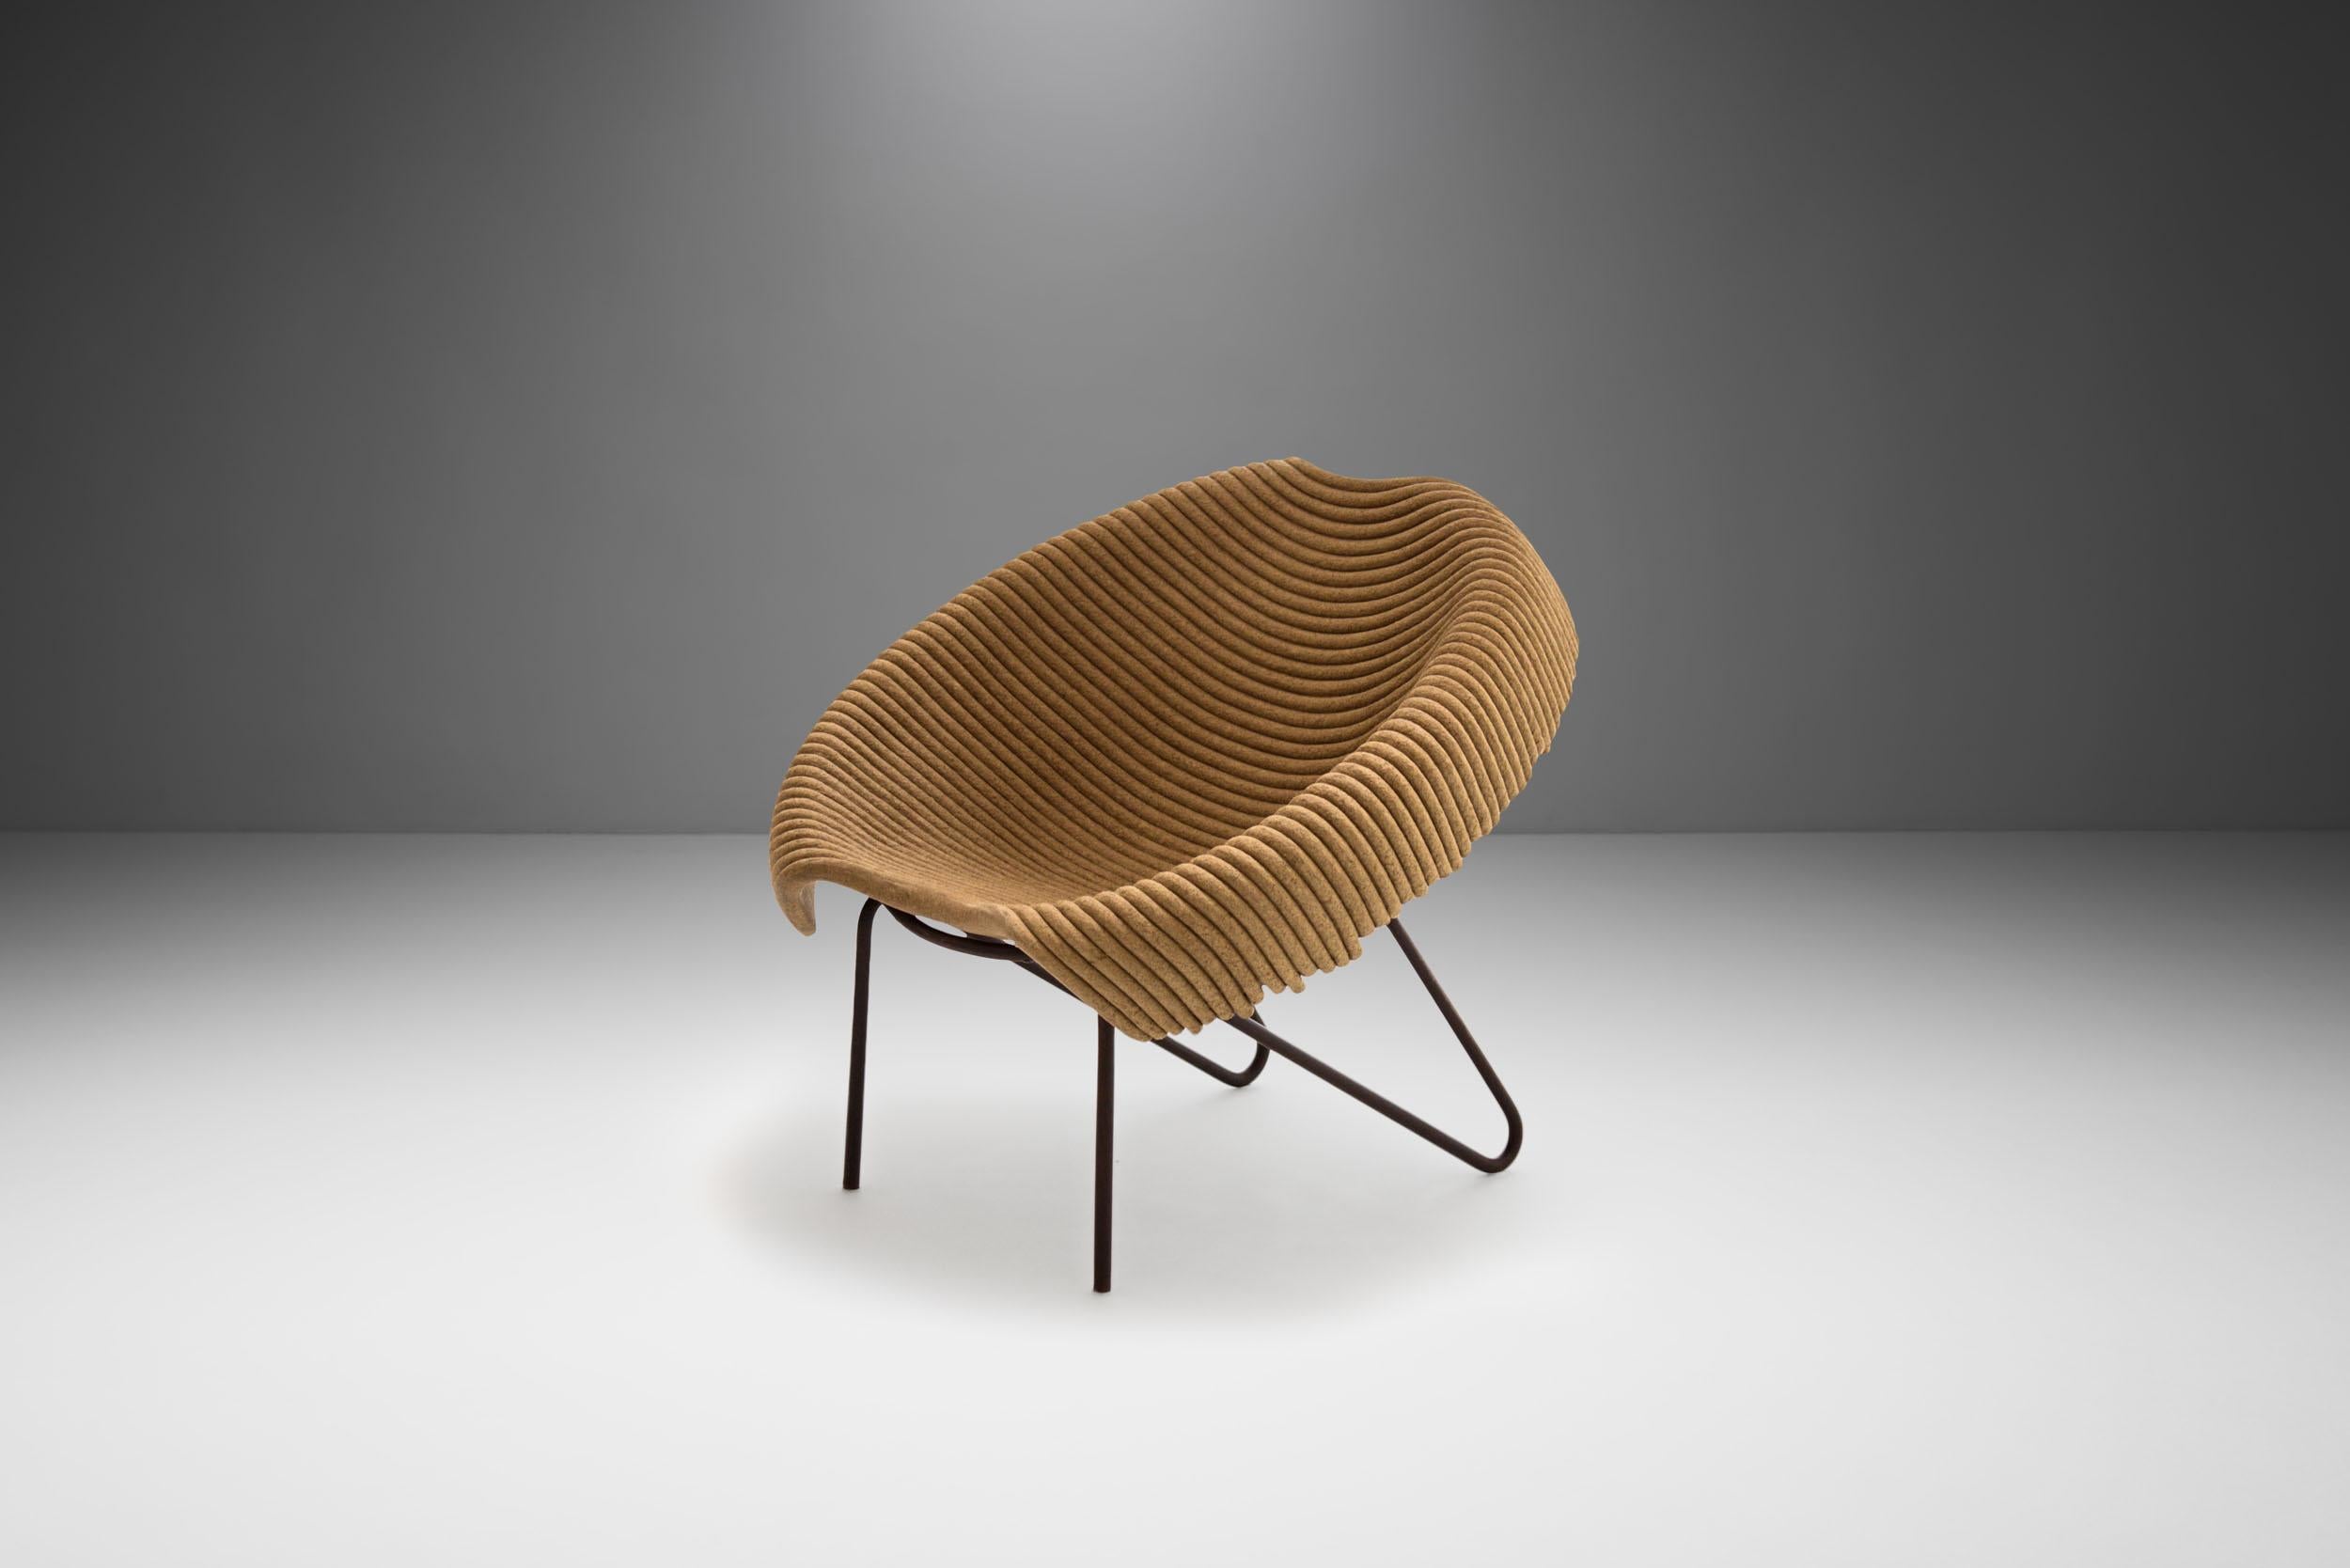 This “Leiras” chair was designed and produced by contemporary Brazilian artist Domingos Tótora and is in line with the artist’s environmental creed.

This model reflects Tótora’s closeness to nature from its shape to its materials and name, for as